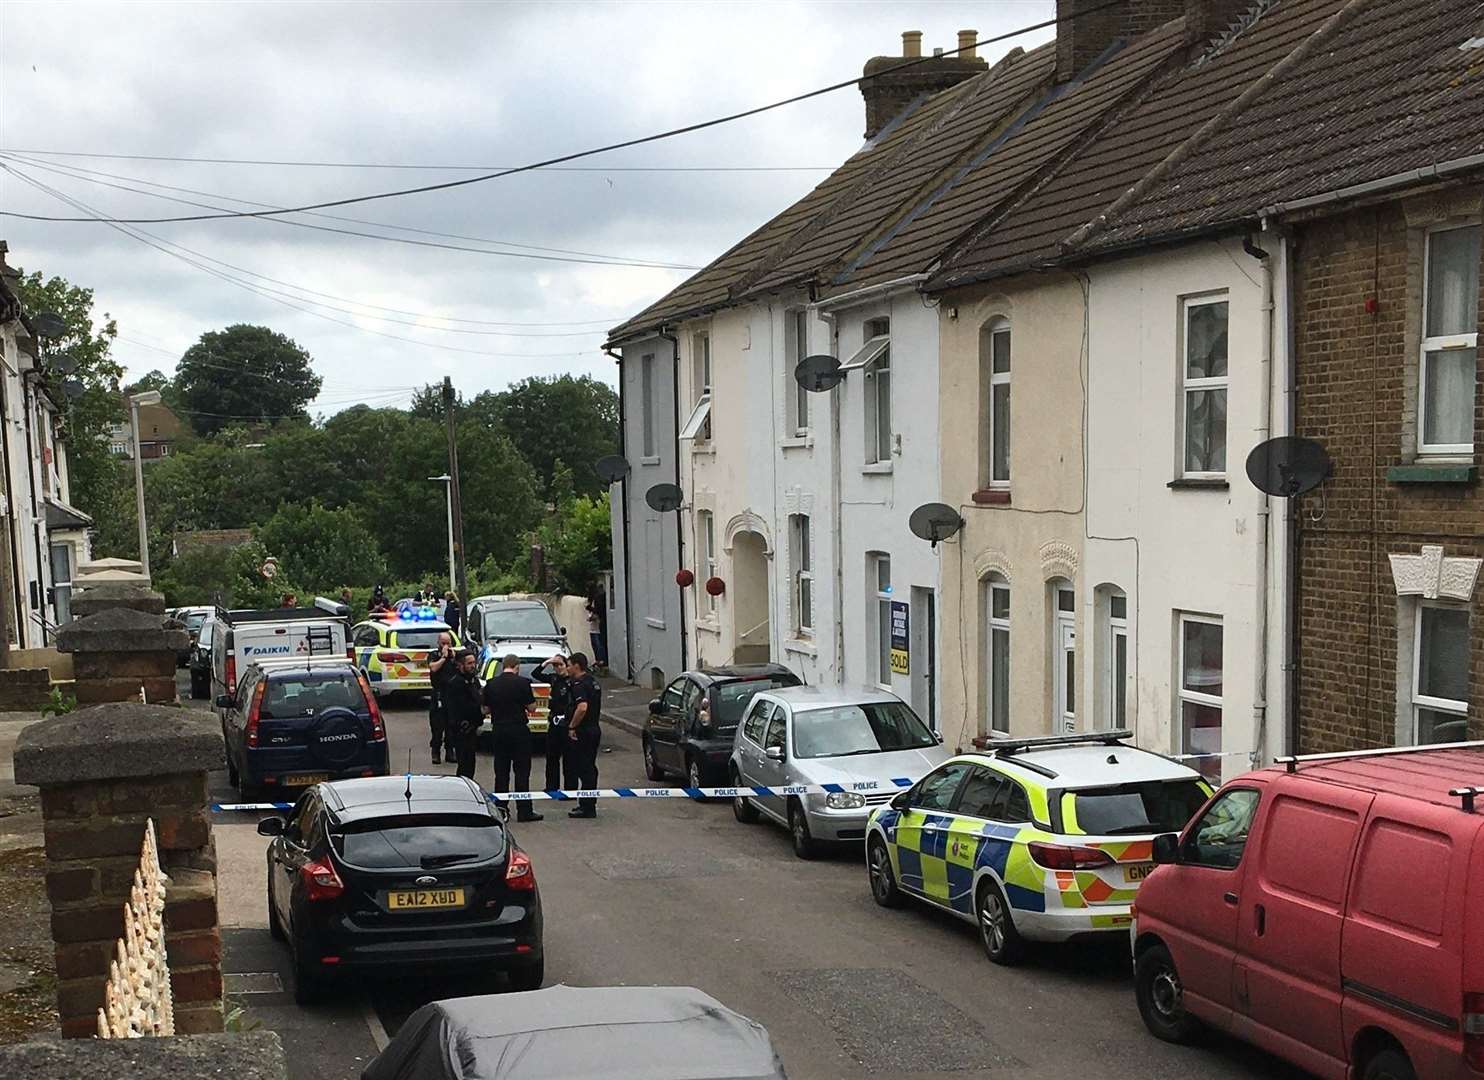 The street has been taped off after it is believed a knife was thrown into a nearby garden